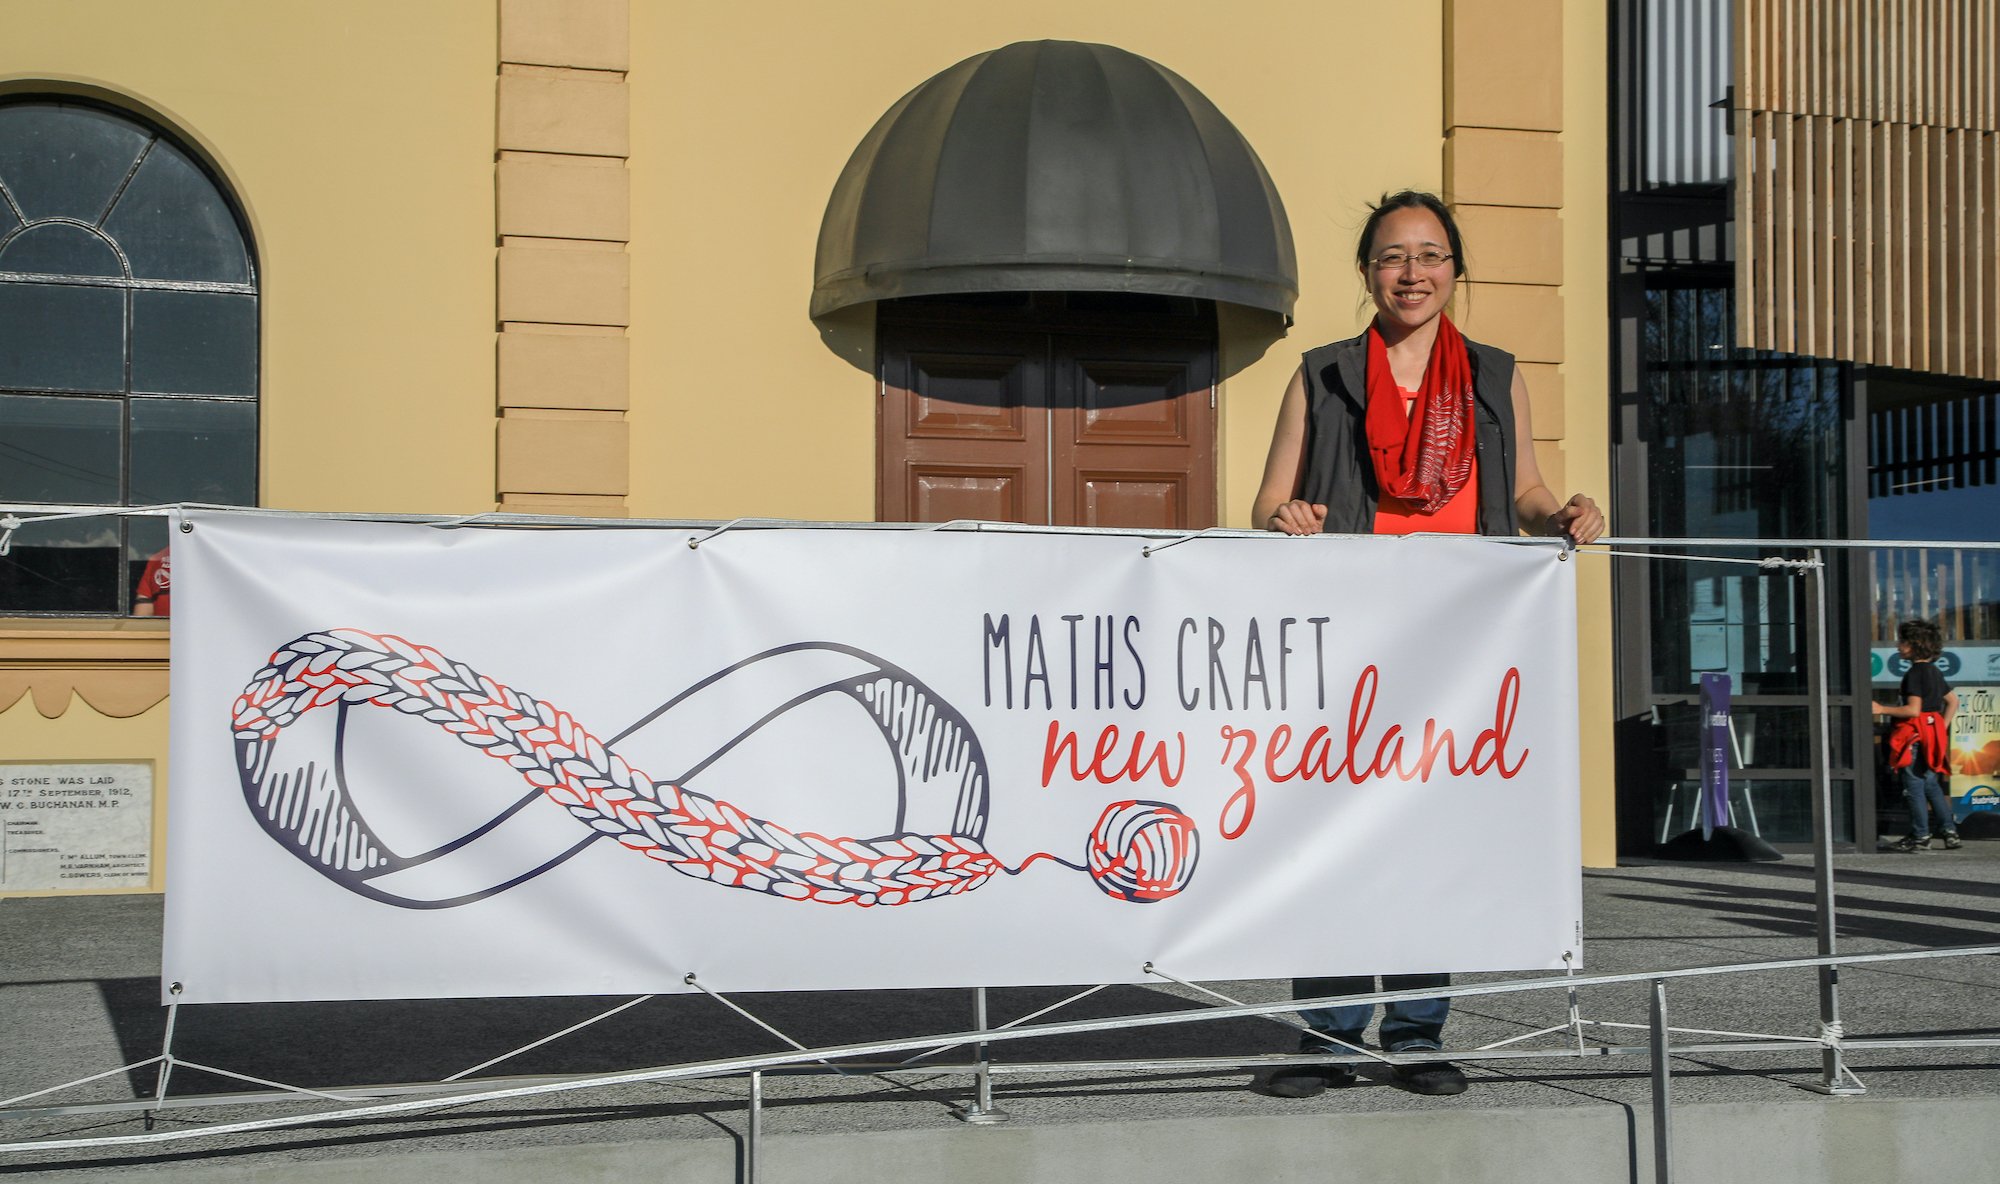 Eugenia Cheng standing behind the Maths Craft banner outside the Martinborough Town Hall